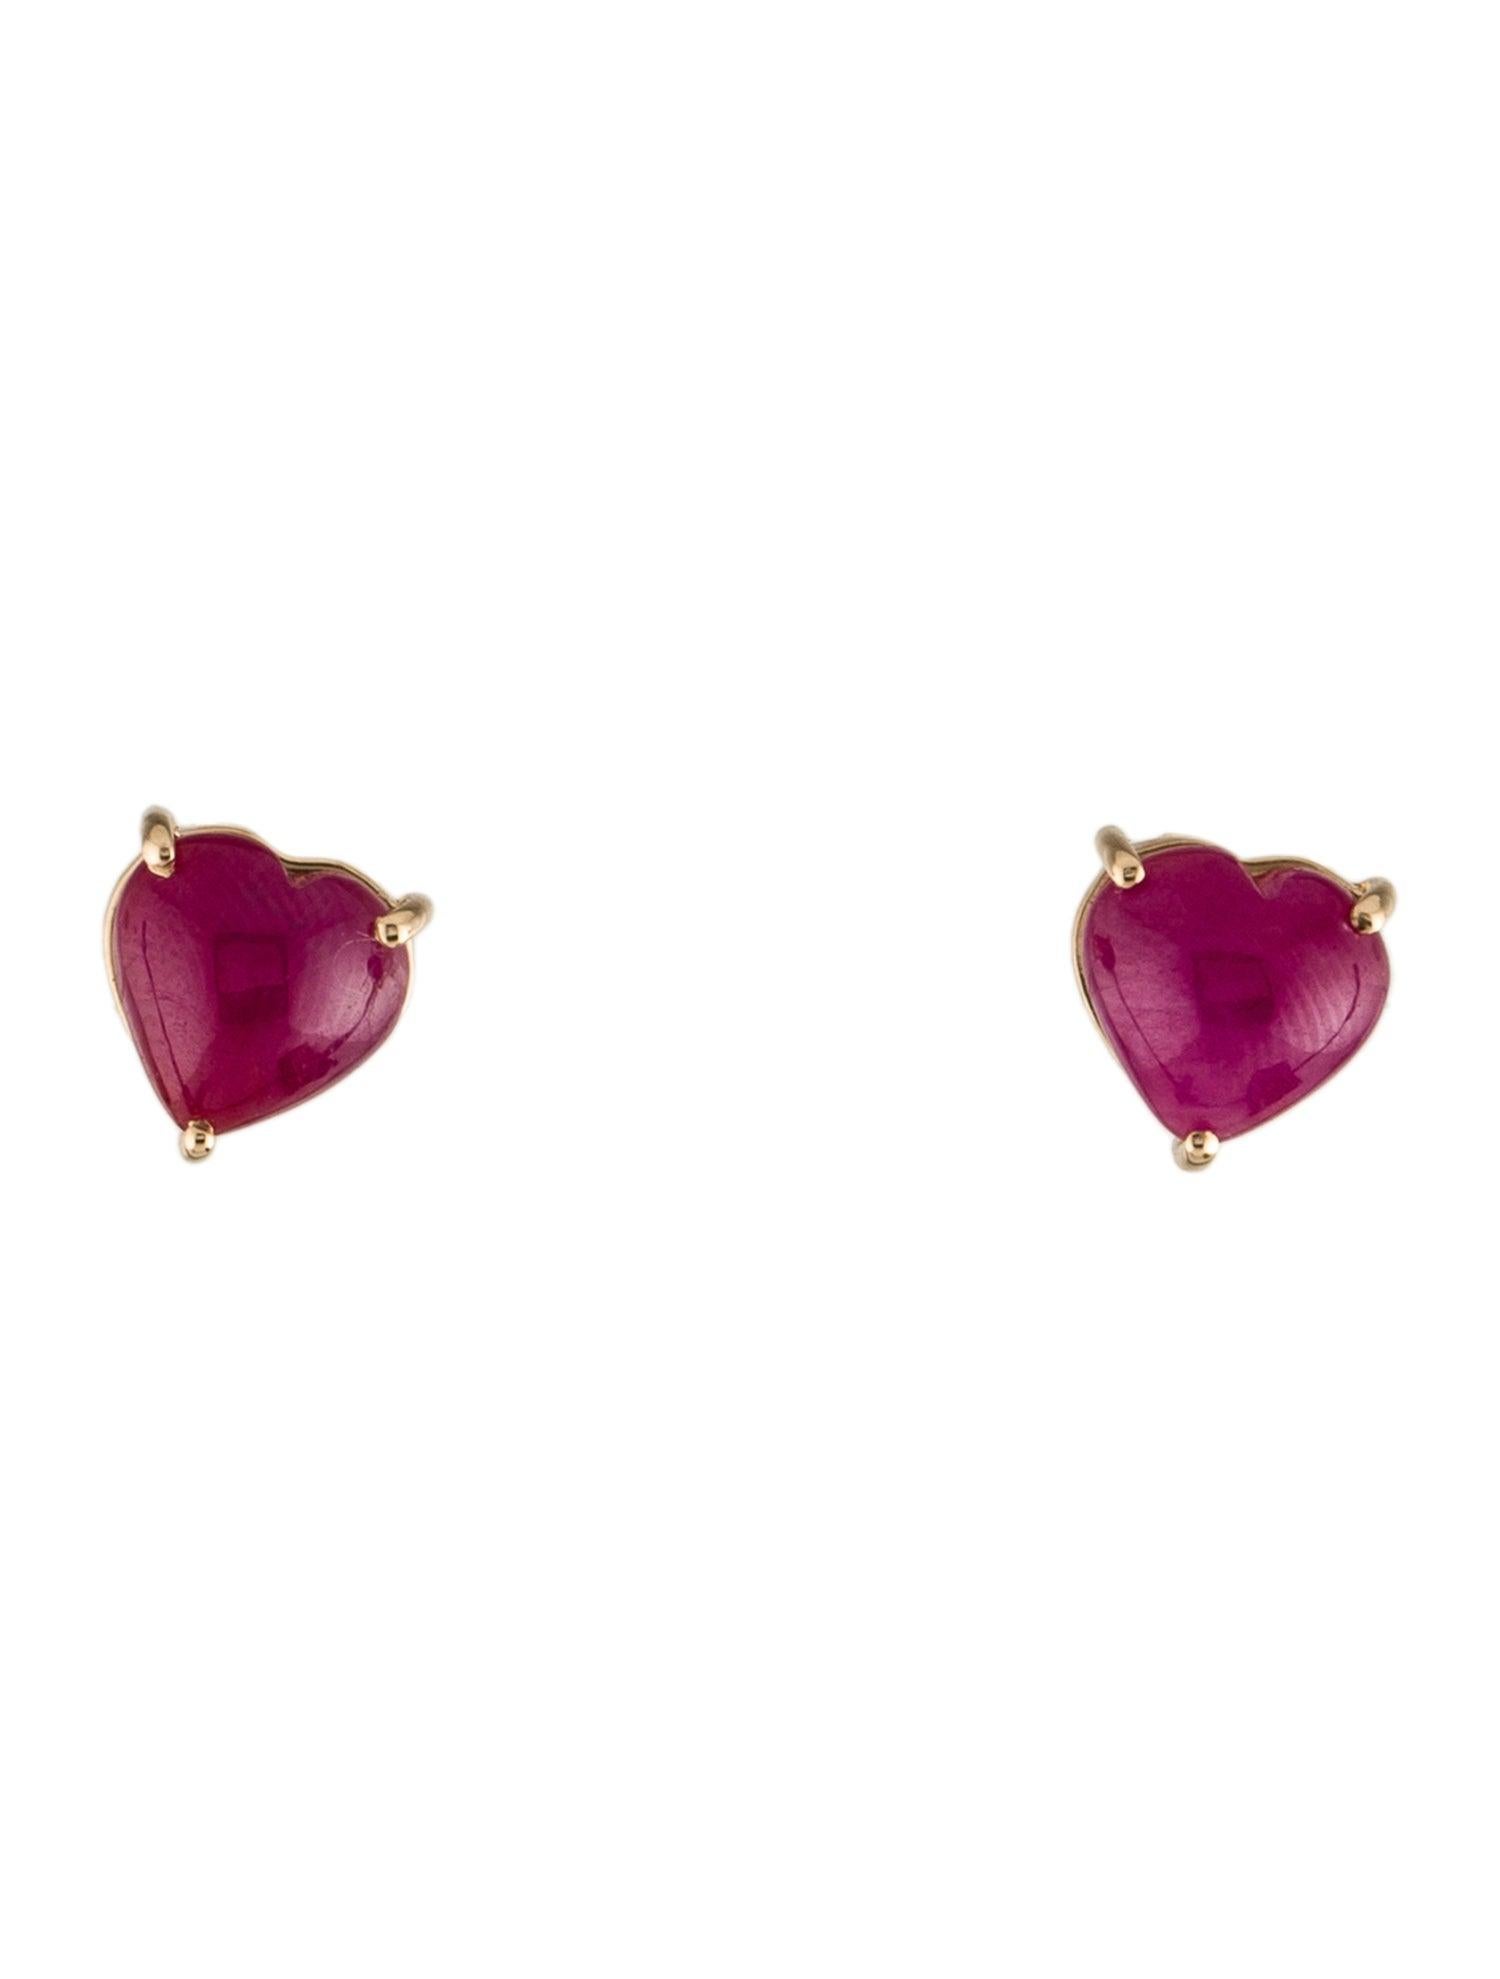 14K Ruby Stud Earrings - 6.39ctw, Elegant Gemstone Jewelry, Timeless Style In New Condition For Sale In Holtsville, NY